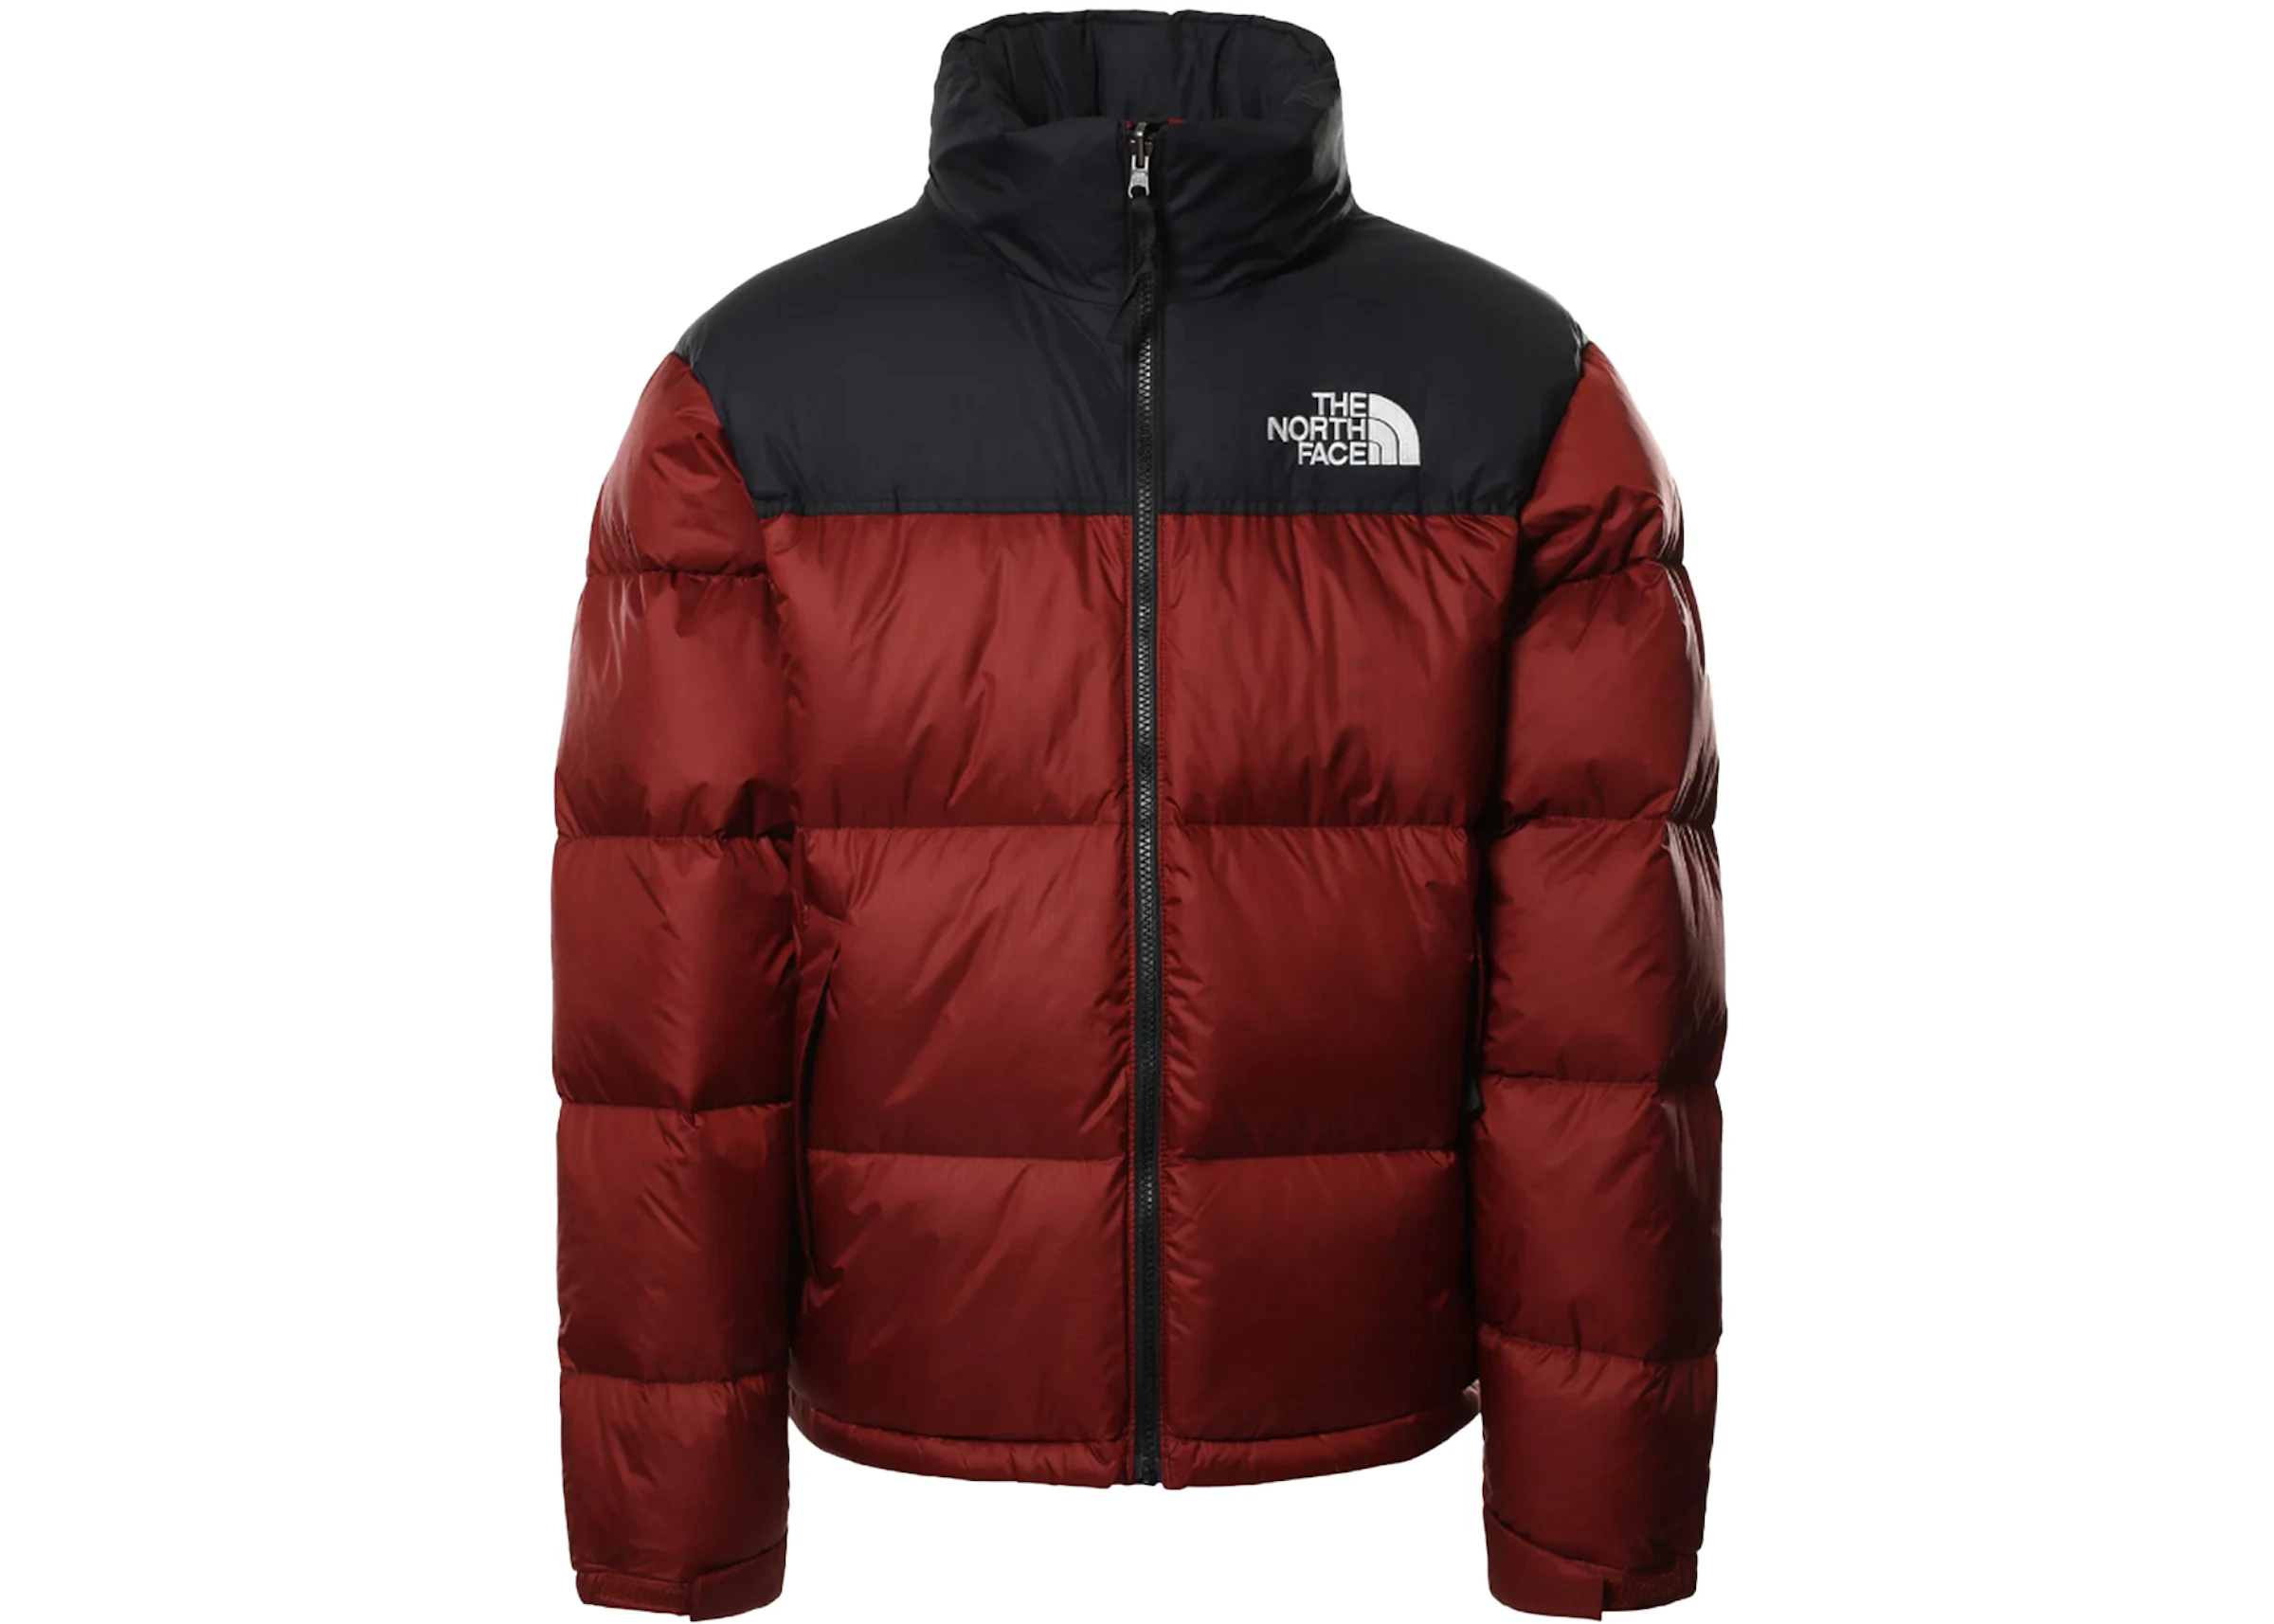 The room Entertainment Short life The North Face 1996 Retro Nuptse 700 Fill Packable Jacket Brick House Red -  FW21 - US